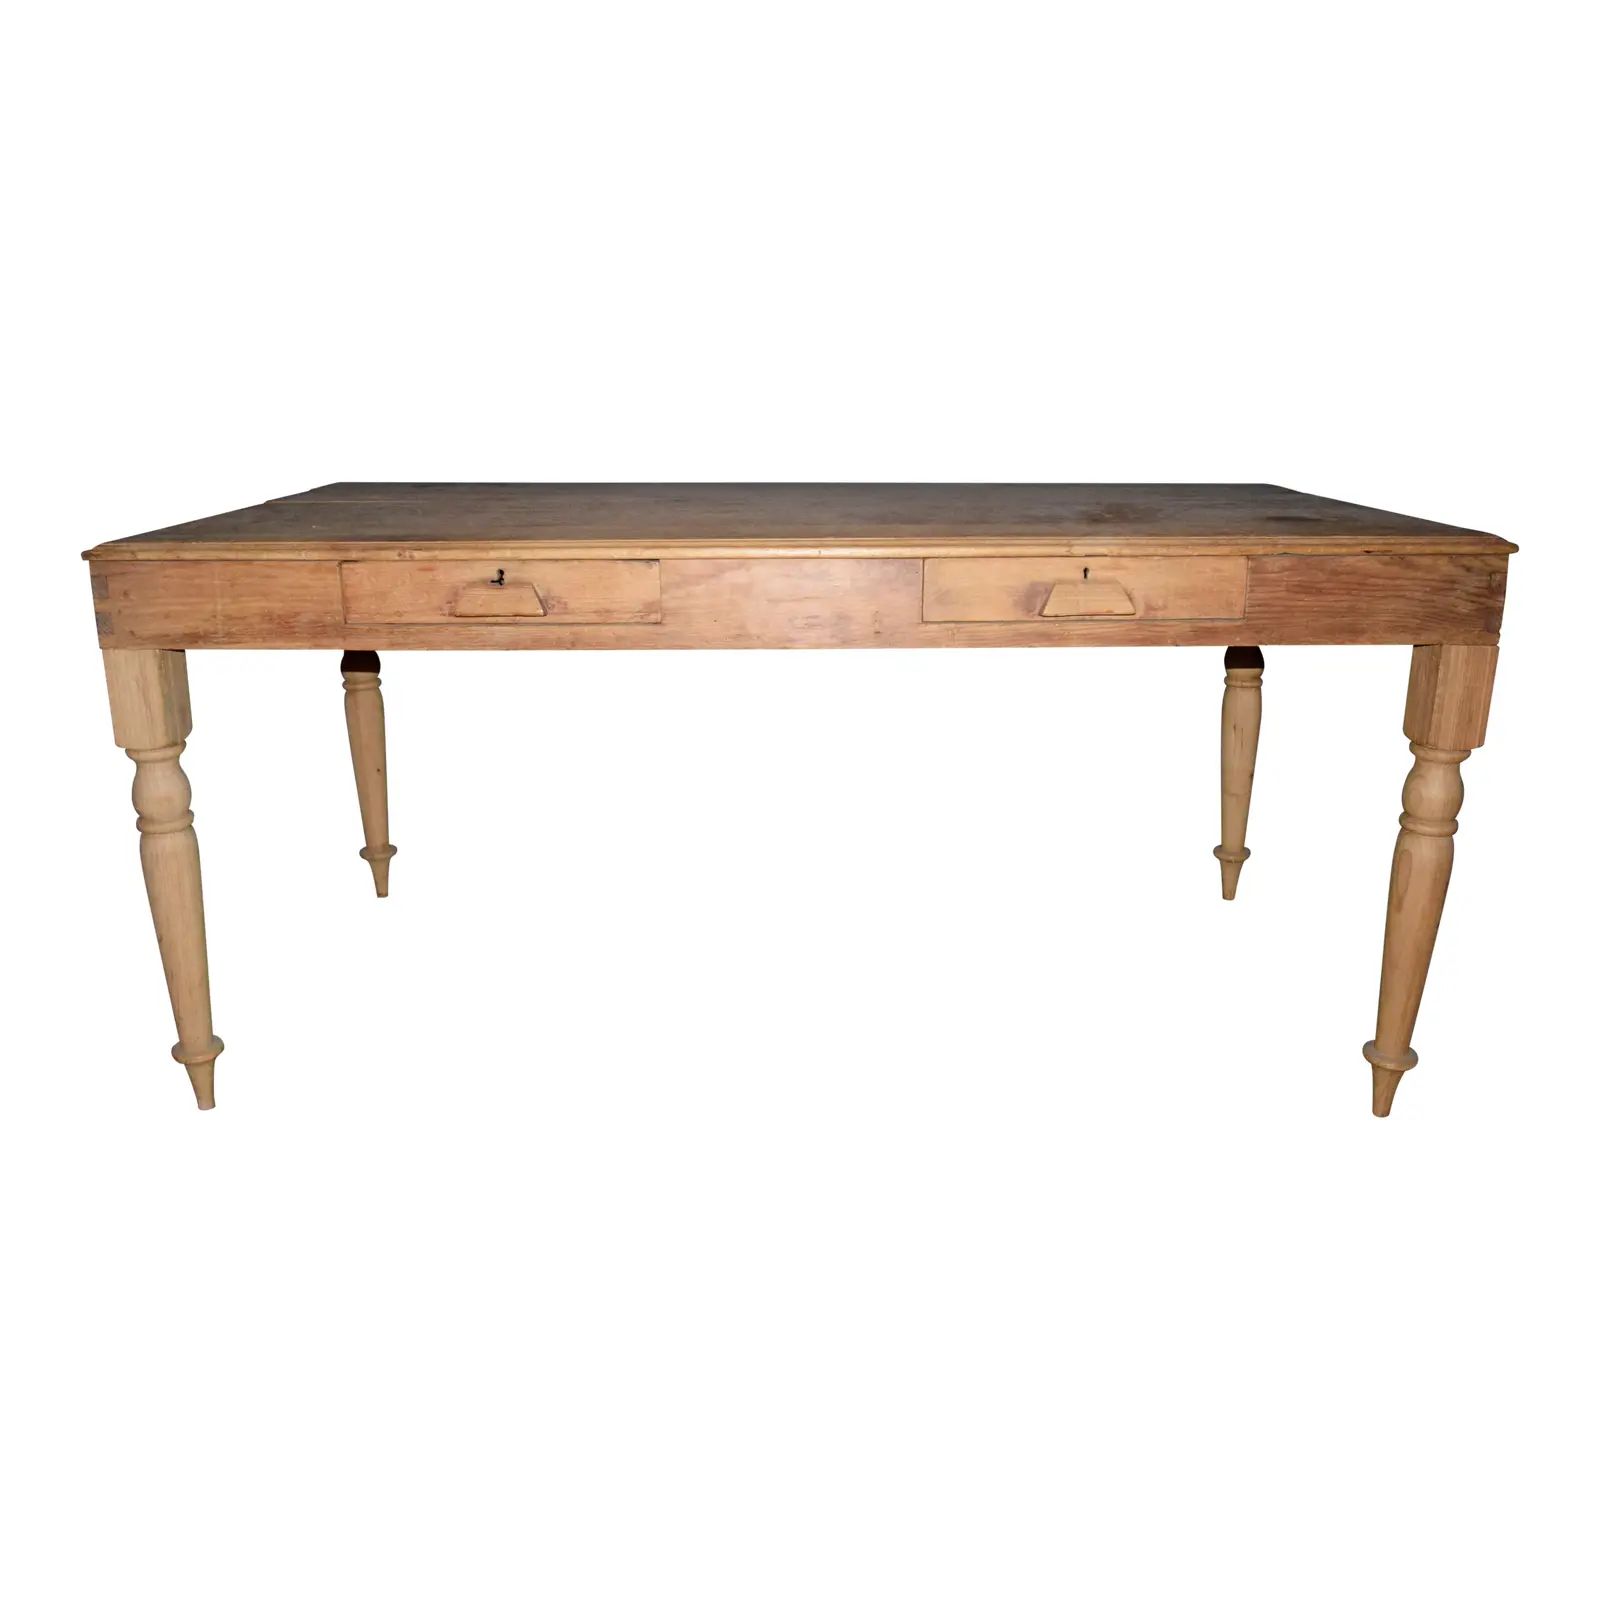 1940s Spanish Colonial Pine Dining Table | Chairish